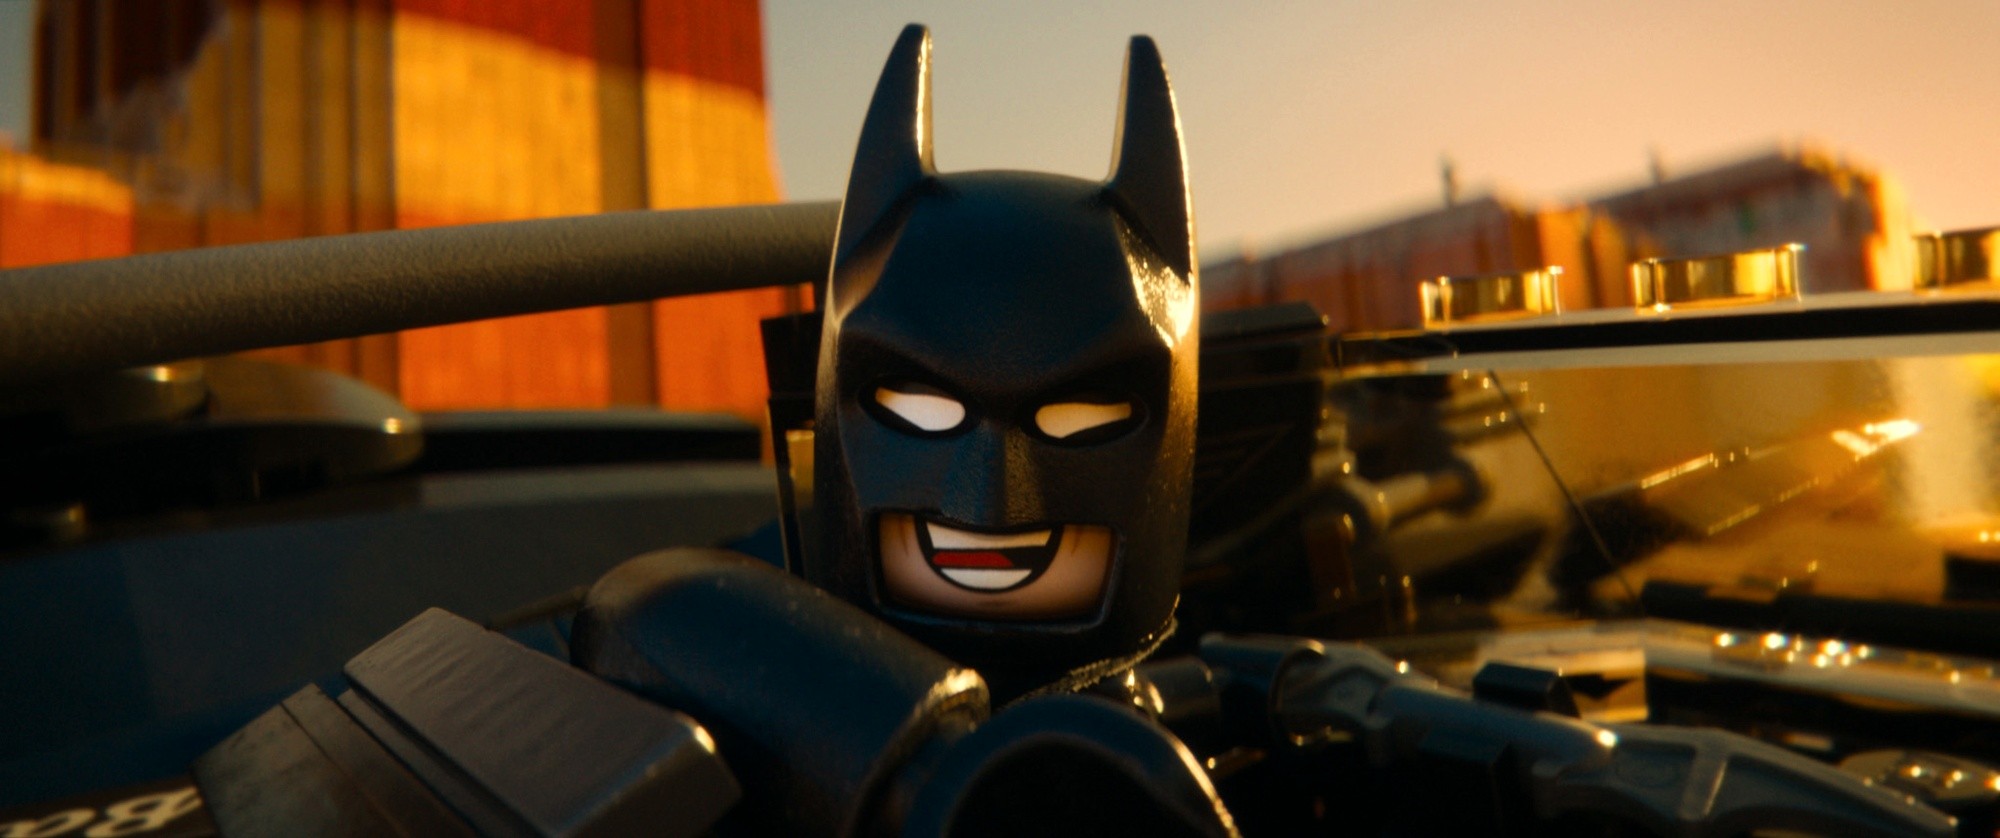 Batman from Warner Bros. Pictures' The Lego Movie (2014)